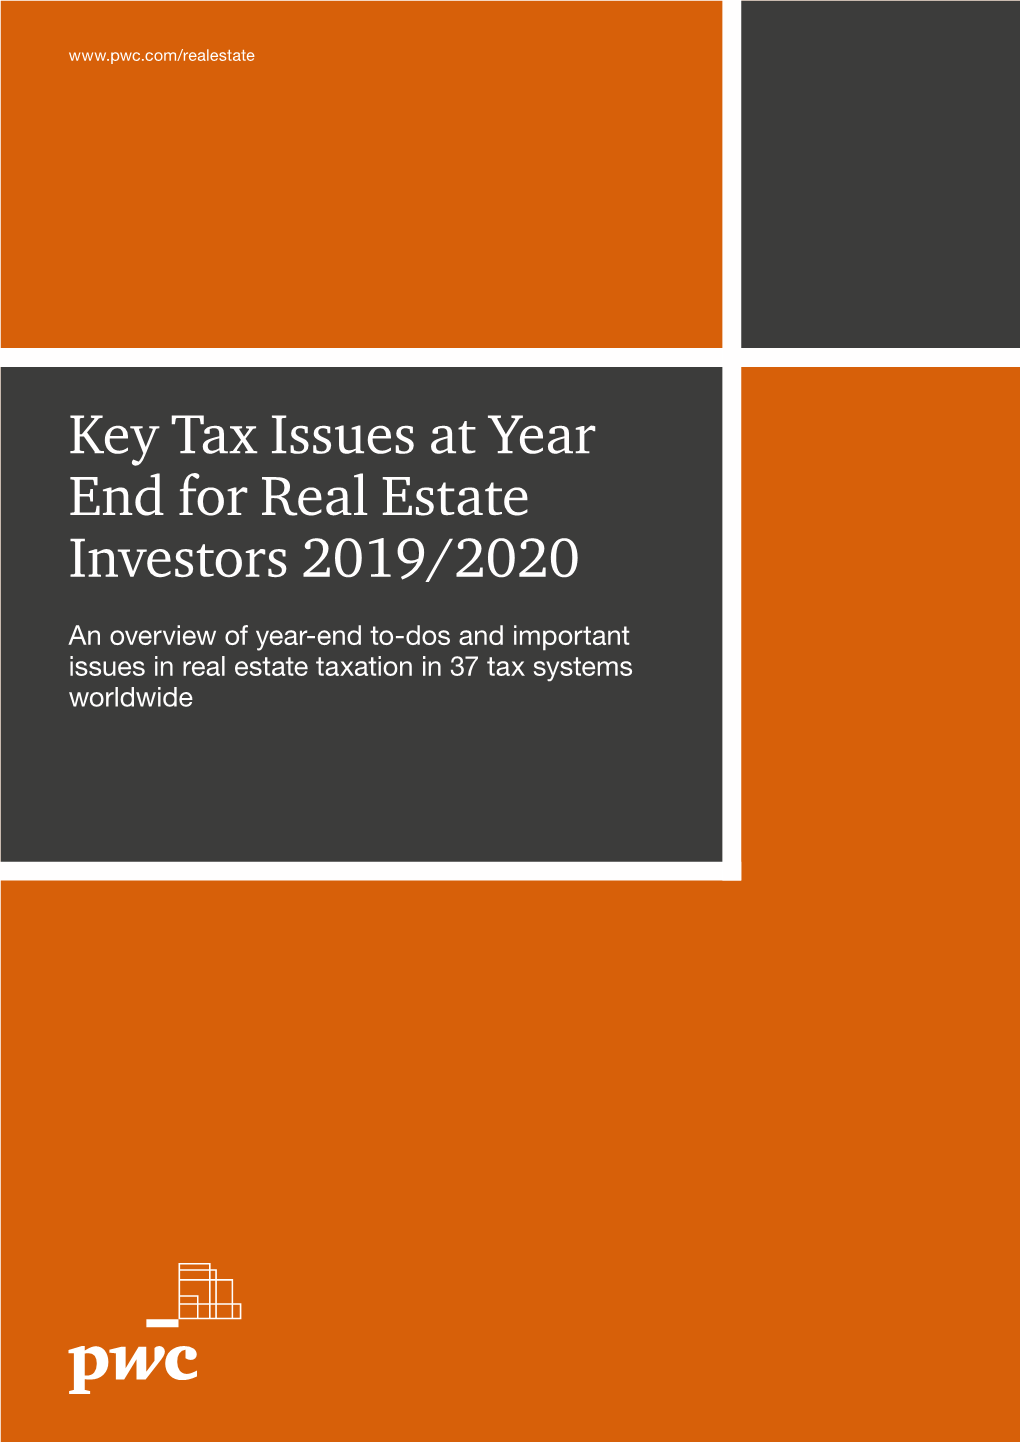 Key Tax Issues at Year End for Real Estate Investors 2019/2020